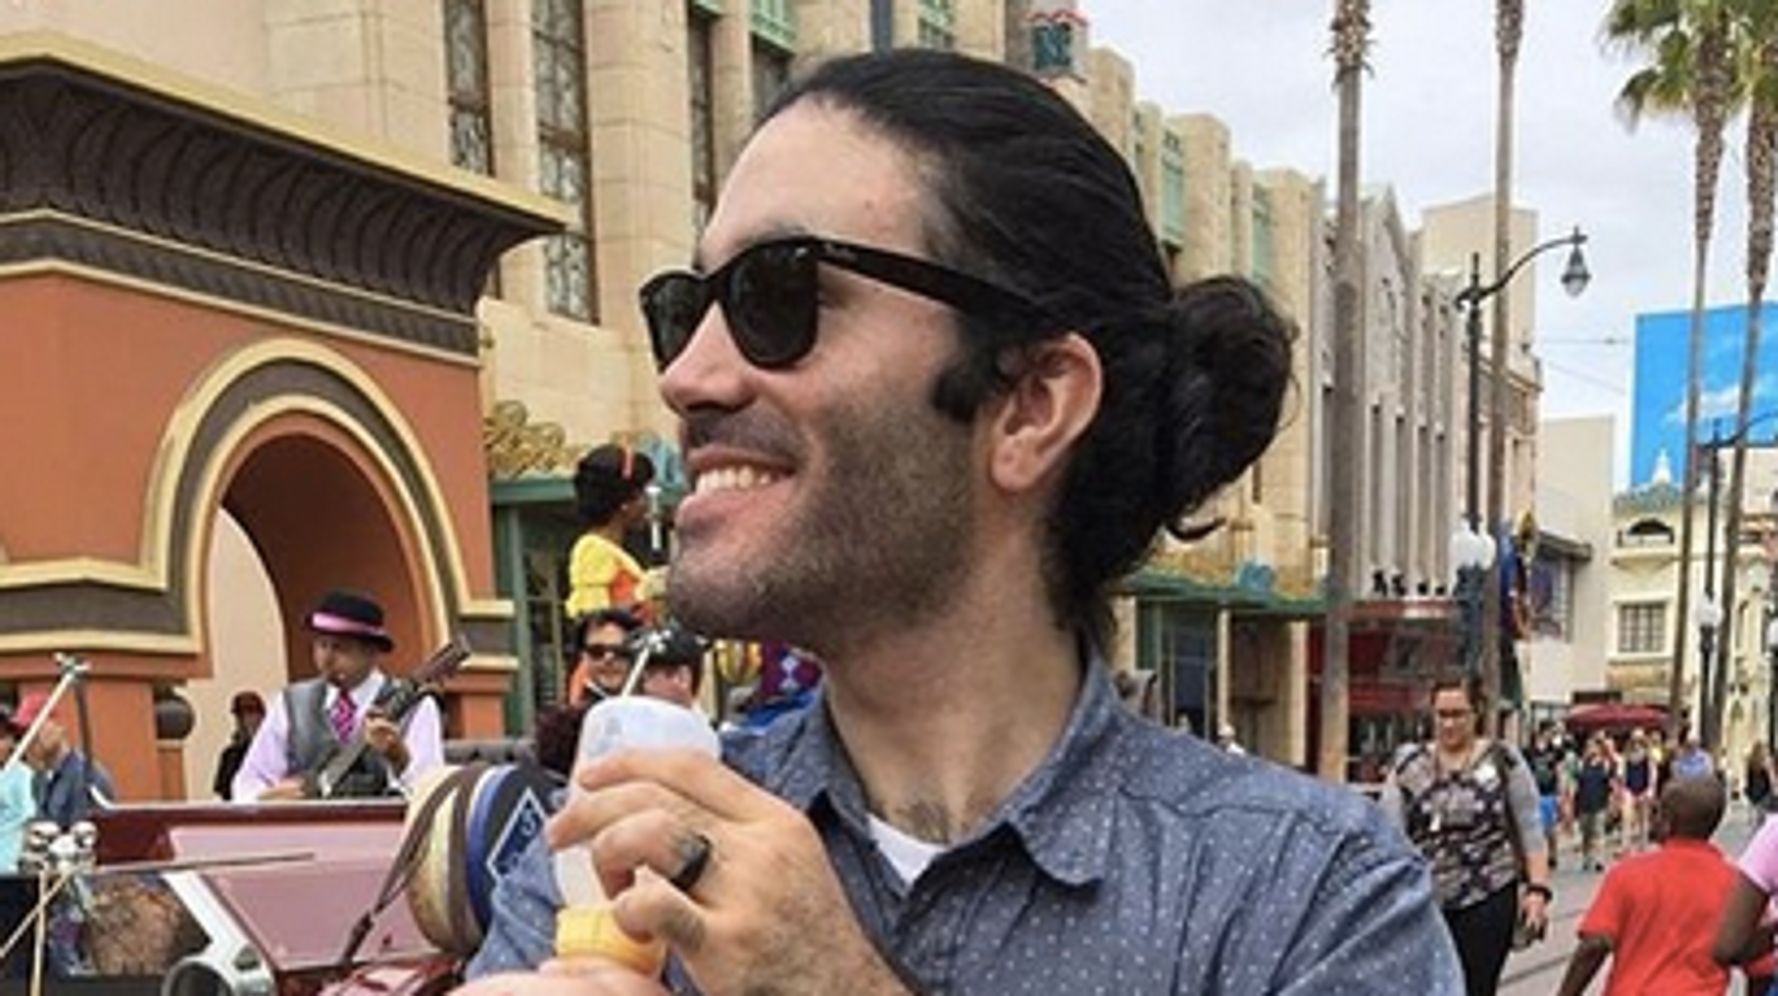 Man Buns Of Disneyland Is The Happiest Place On Instagram Huffpost